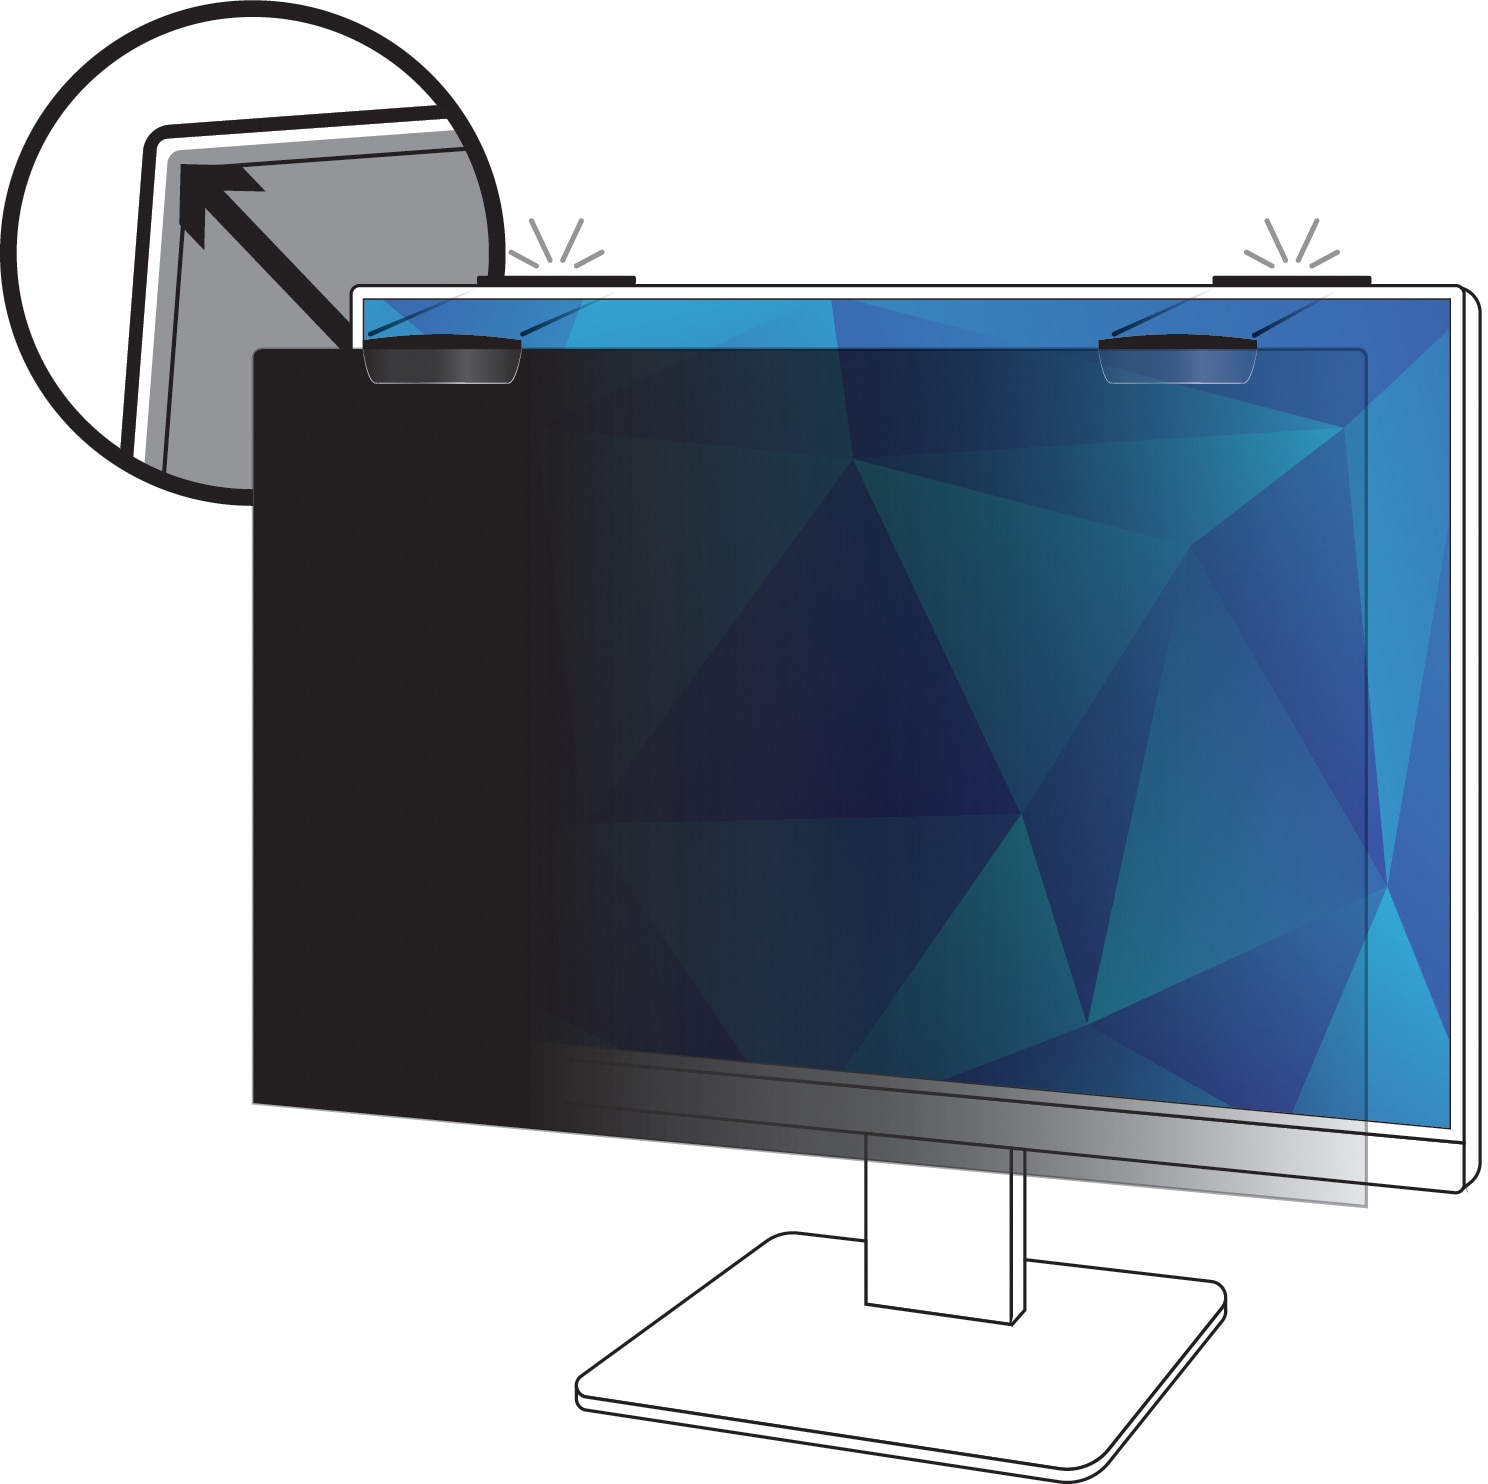 3M display privacy filter - 21.5"